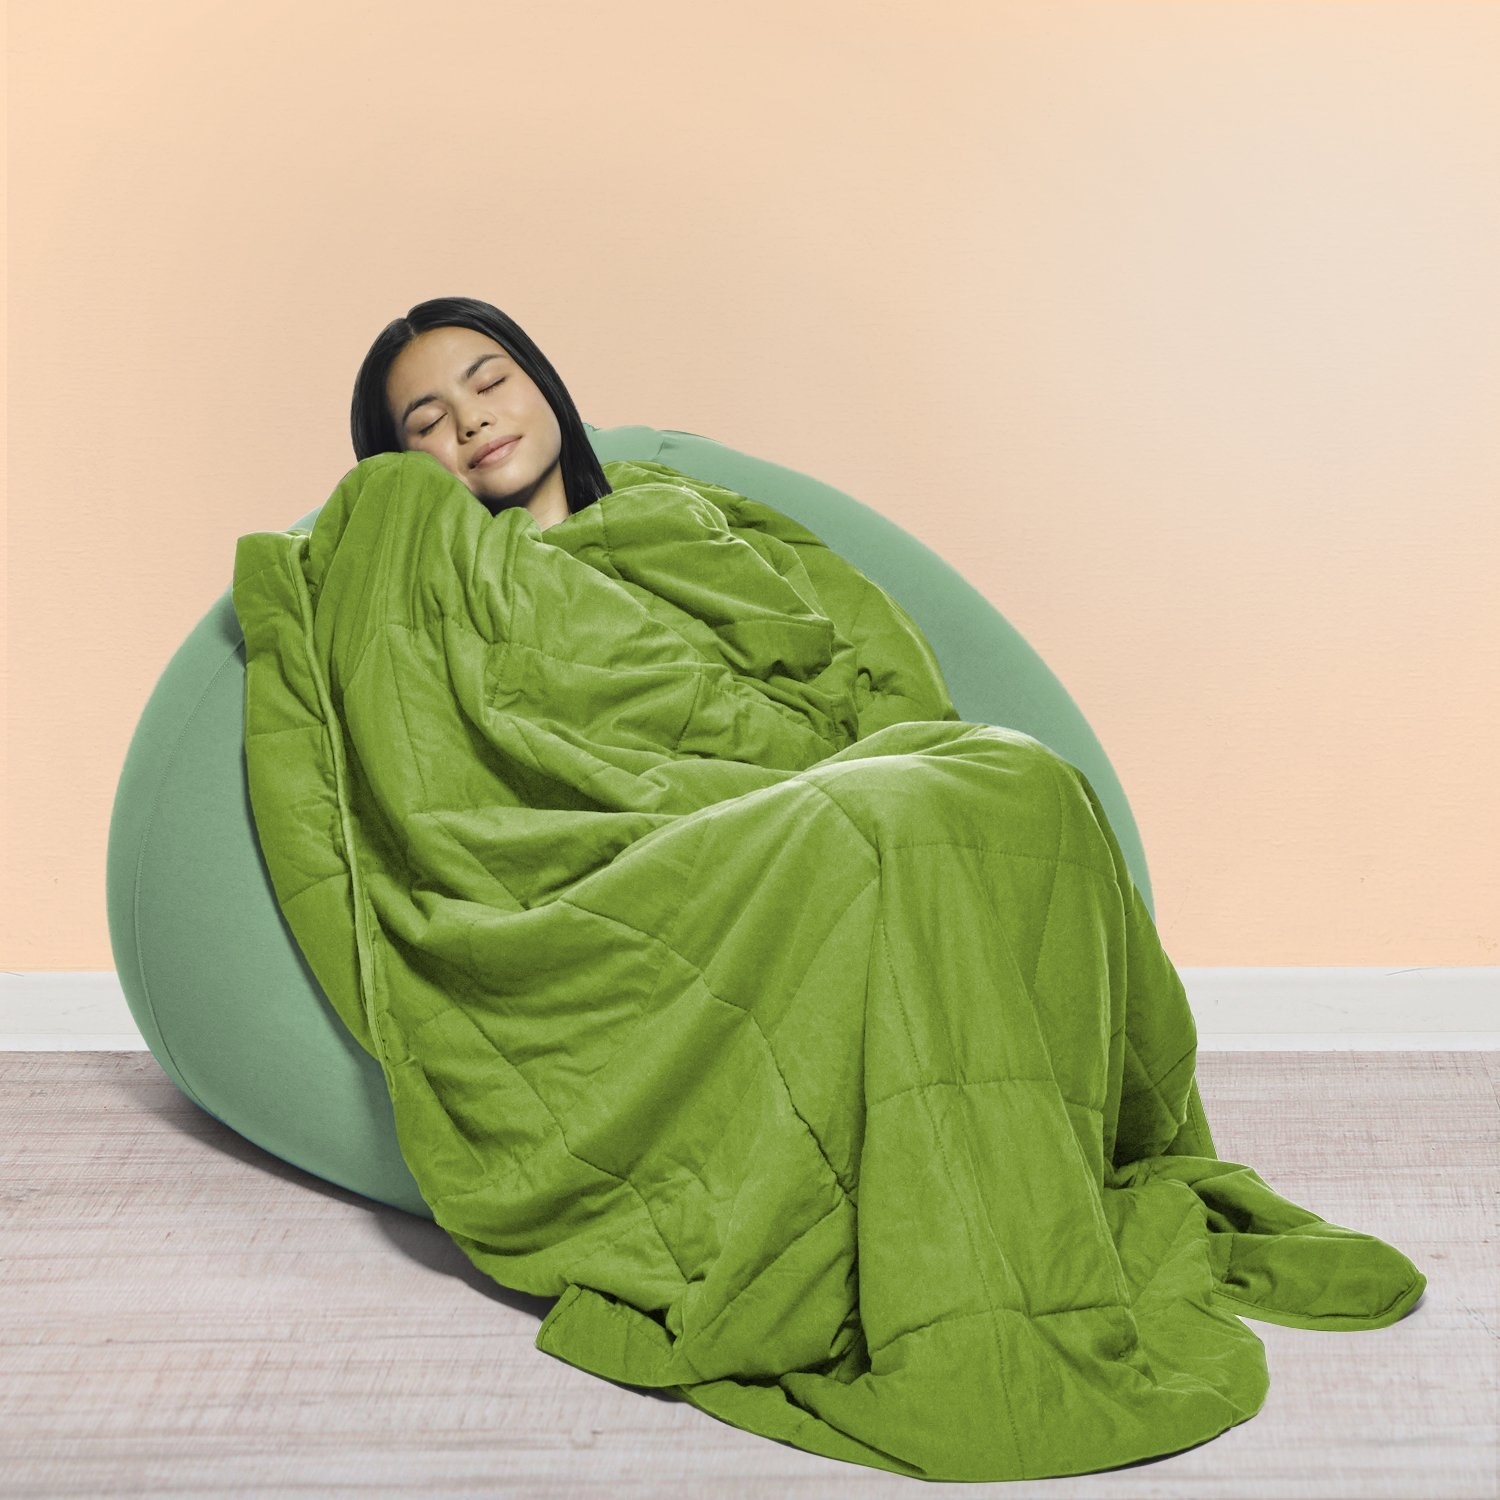 Model snuggled in a chair under a green blanket